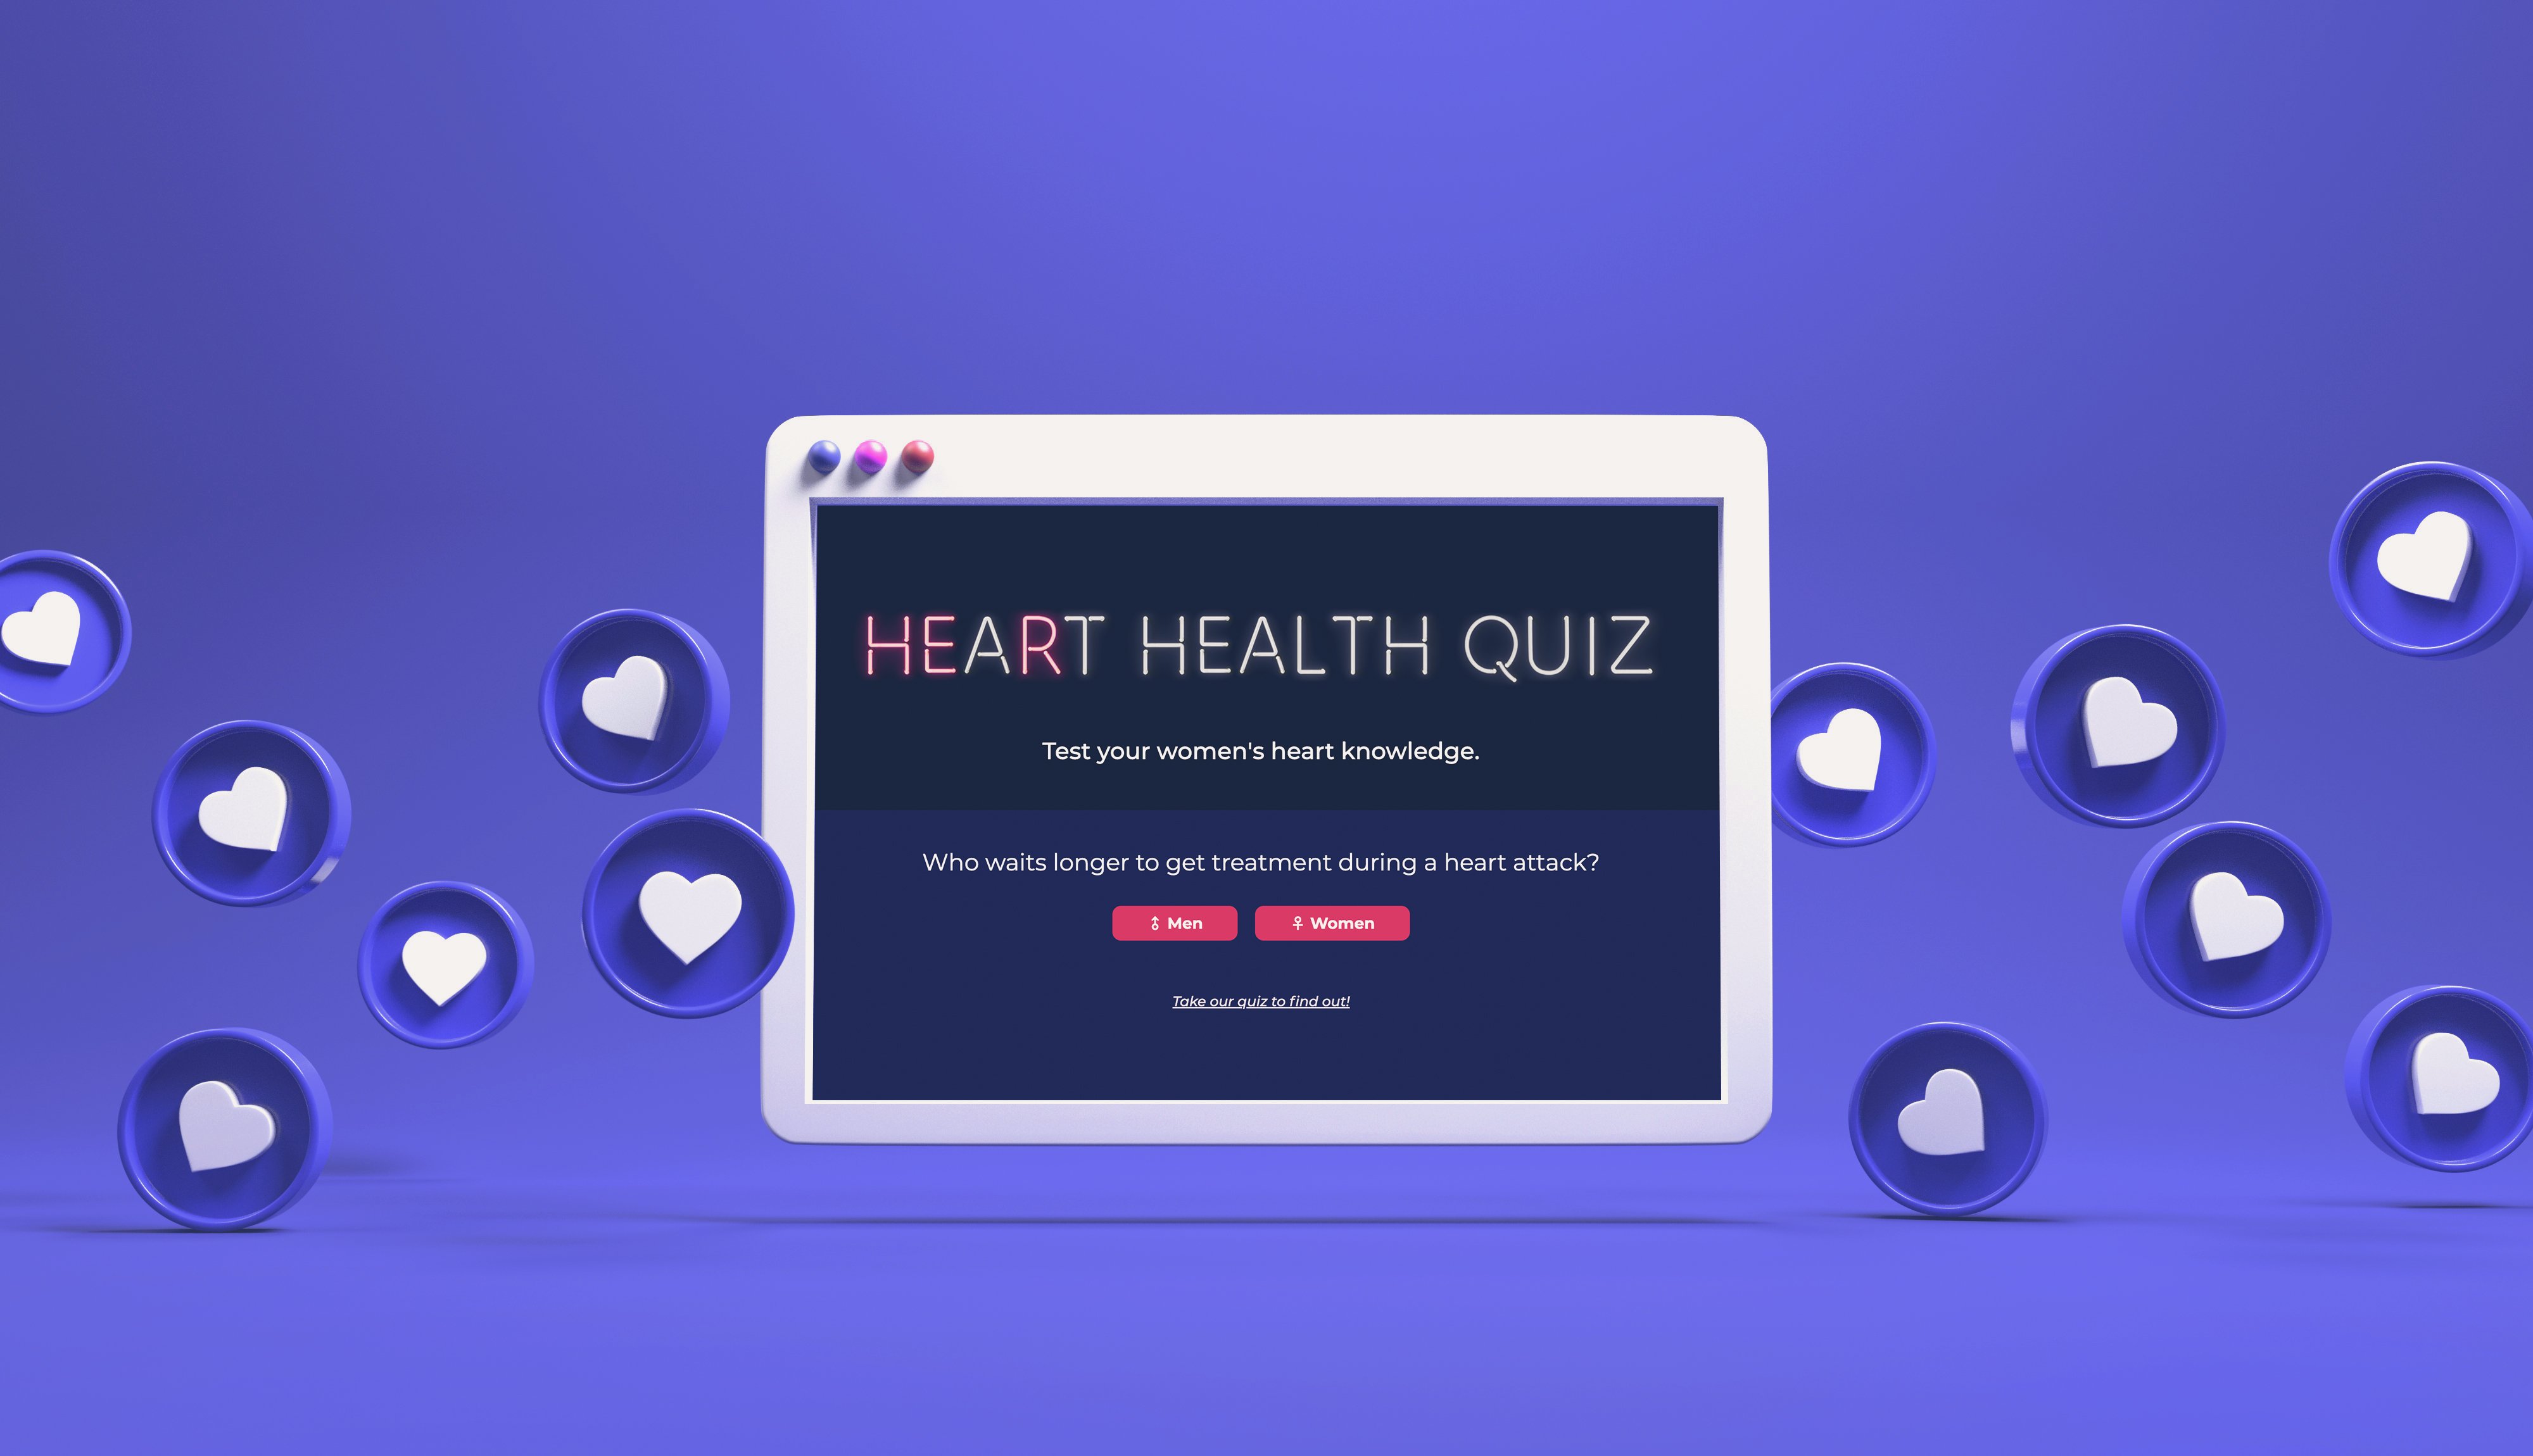 The opening page for the Heart Health Quiz.